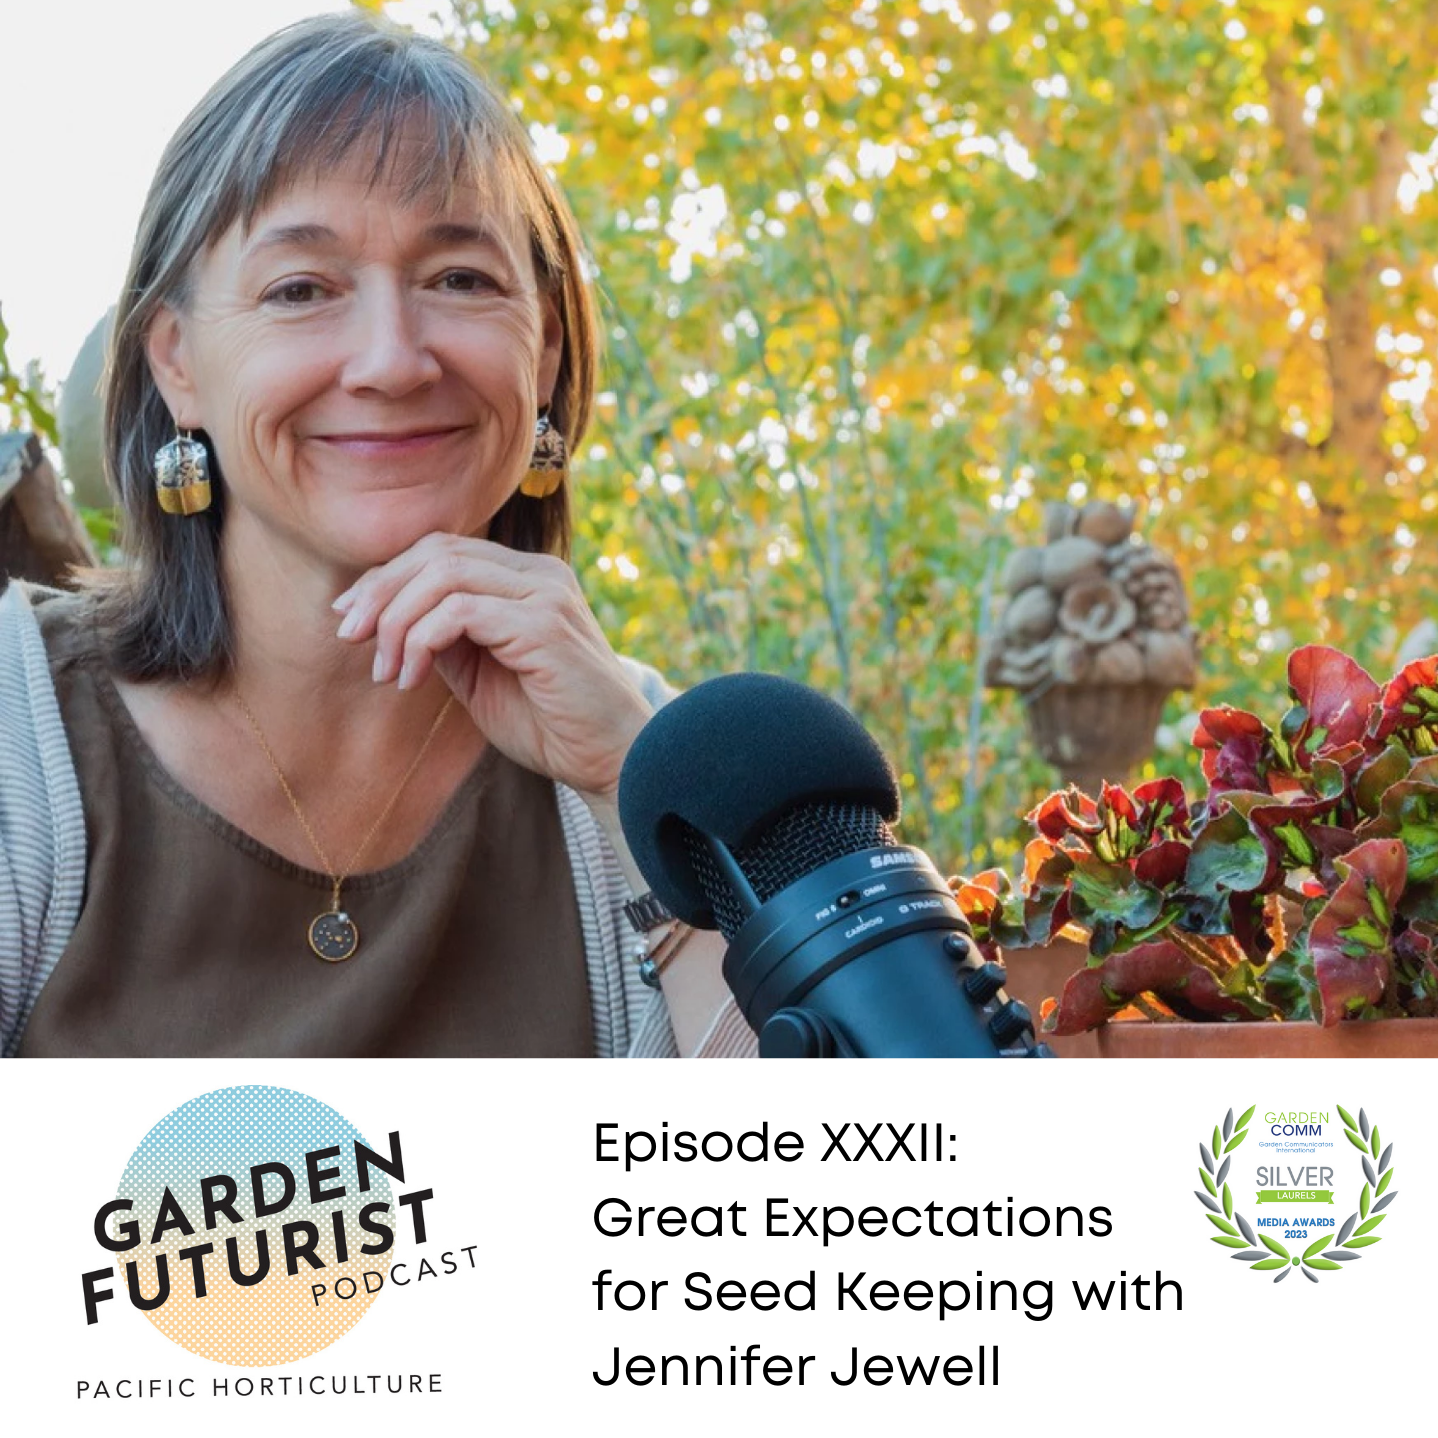 Episode XXXII: Great Expectations for Seed Keeping with Jennifer Jewell